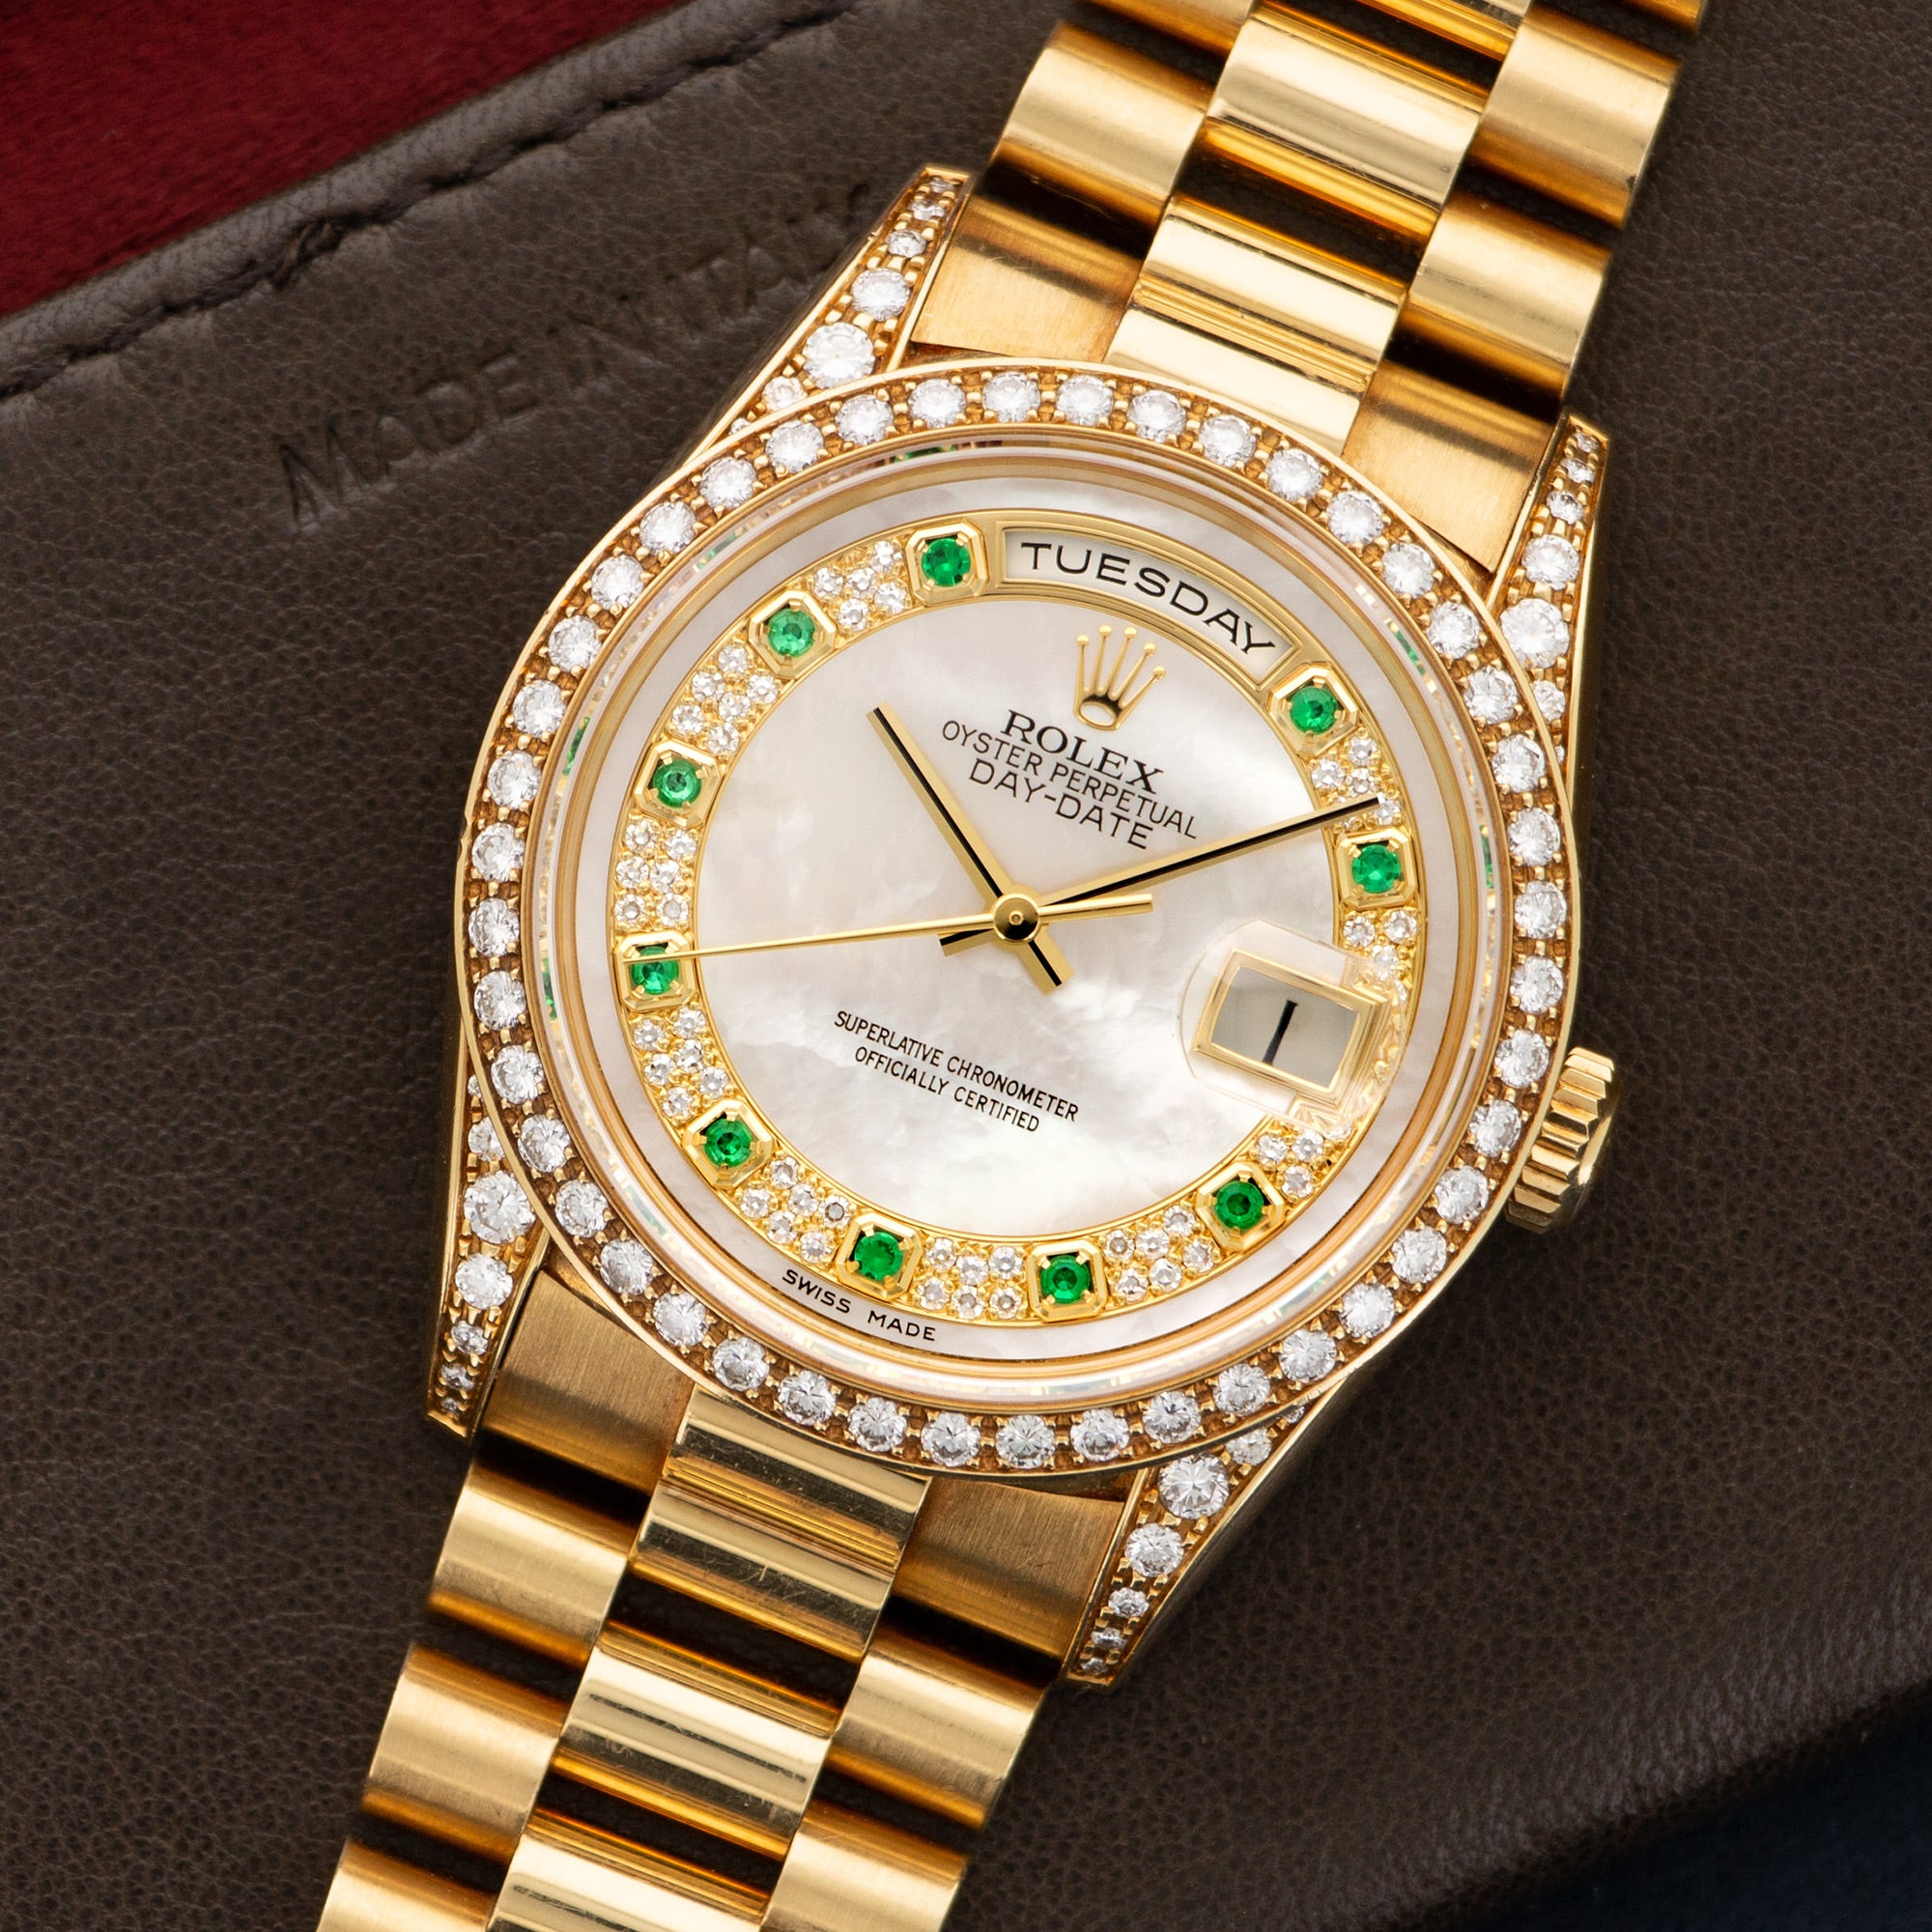 Rolex Day-Date 18388 18k YG – The Watches